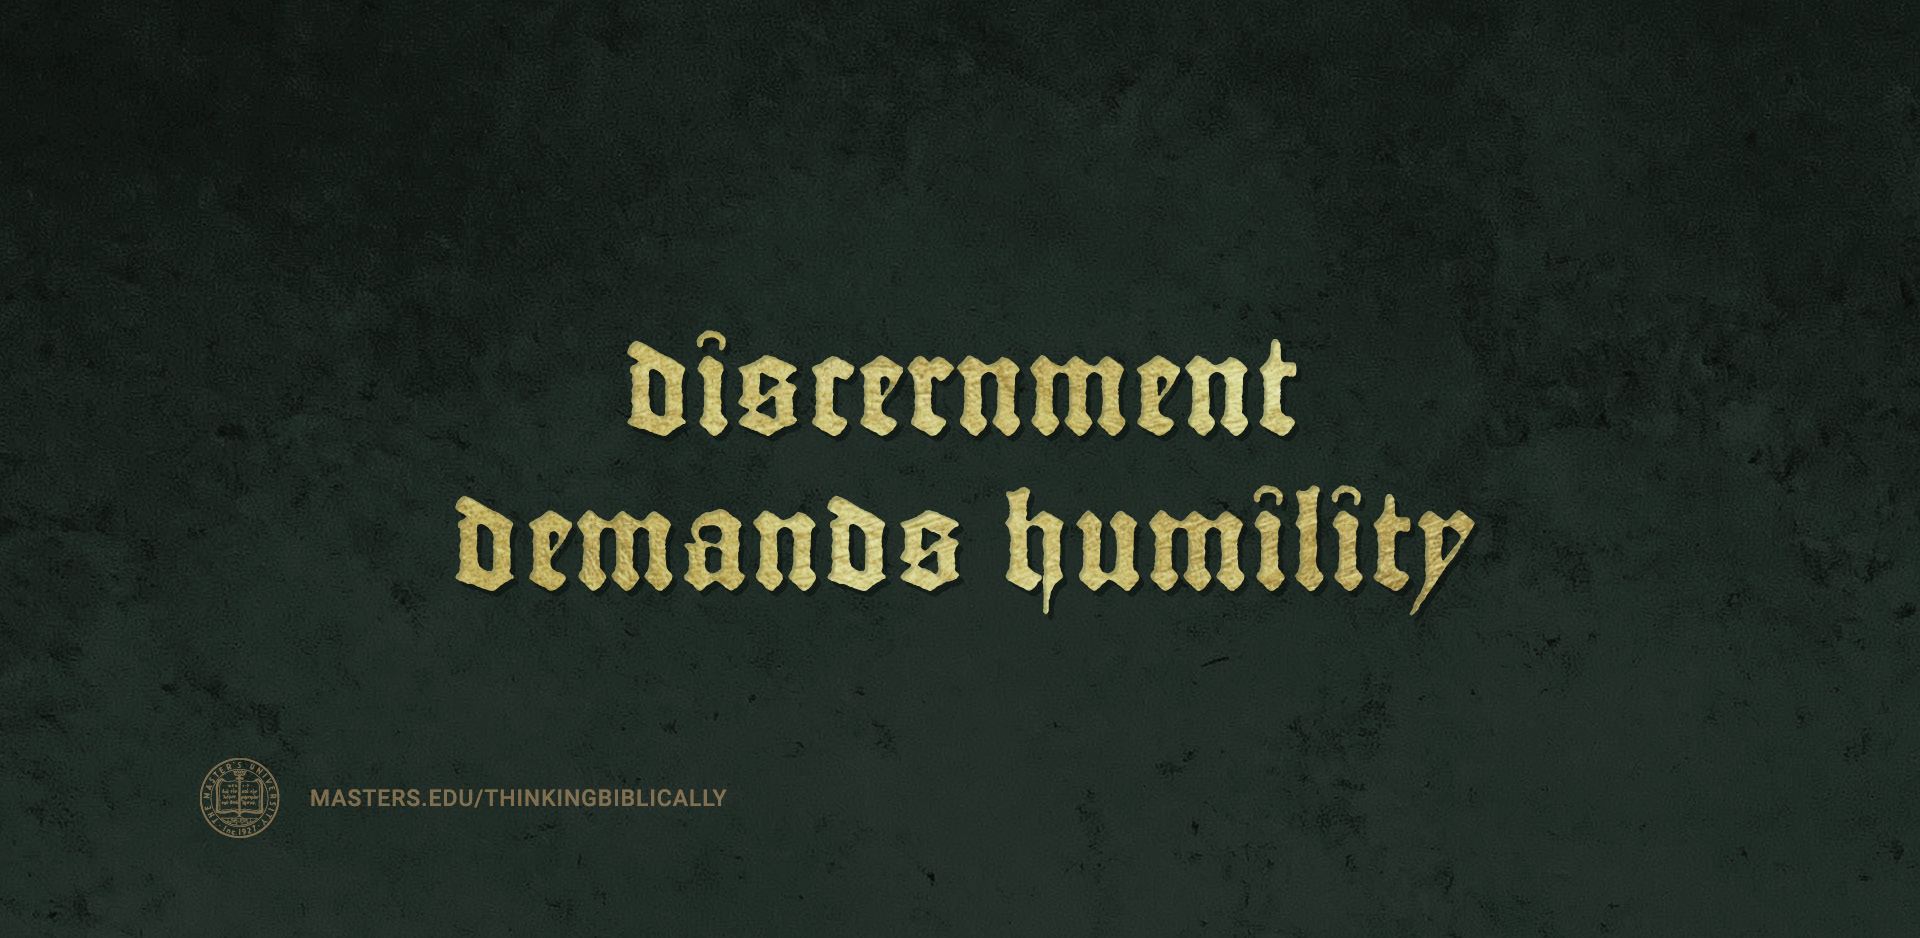 Discernment Demands Humility Featured Image